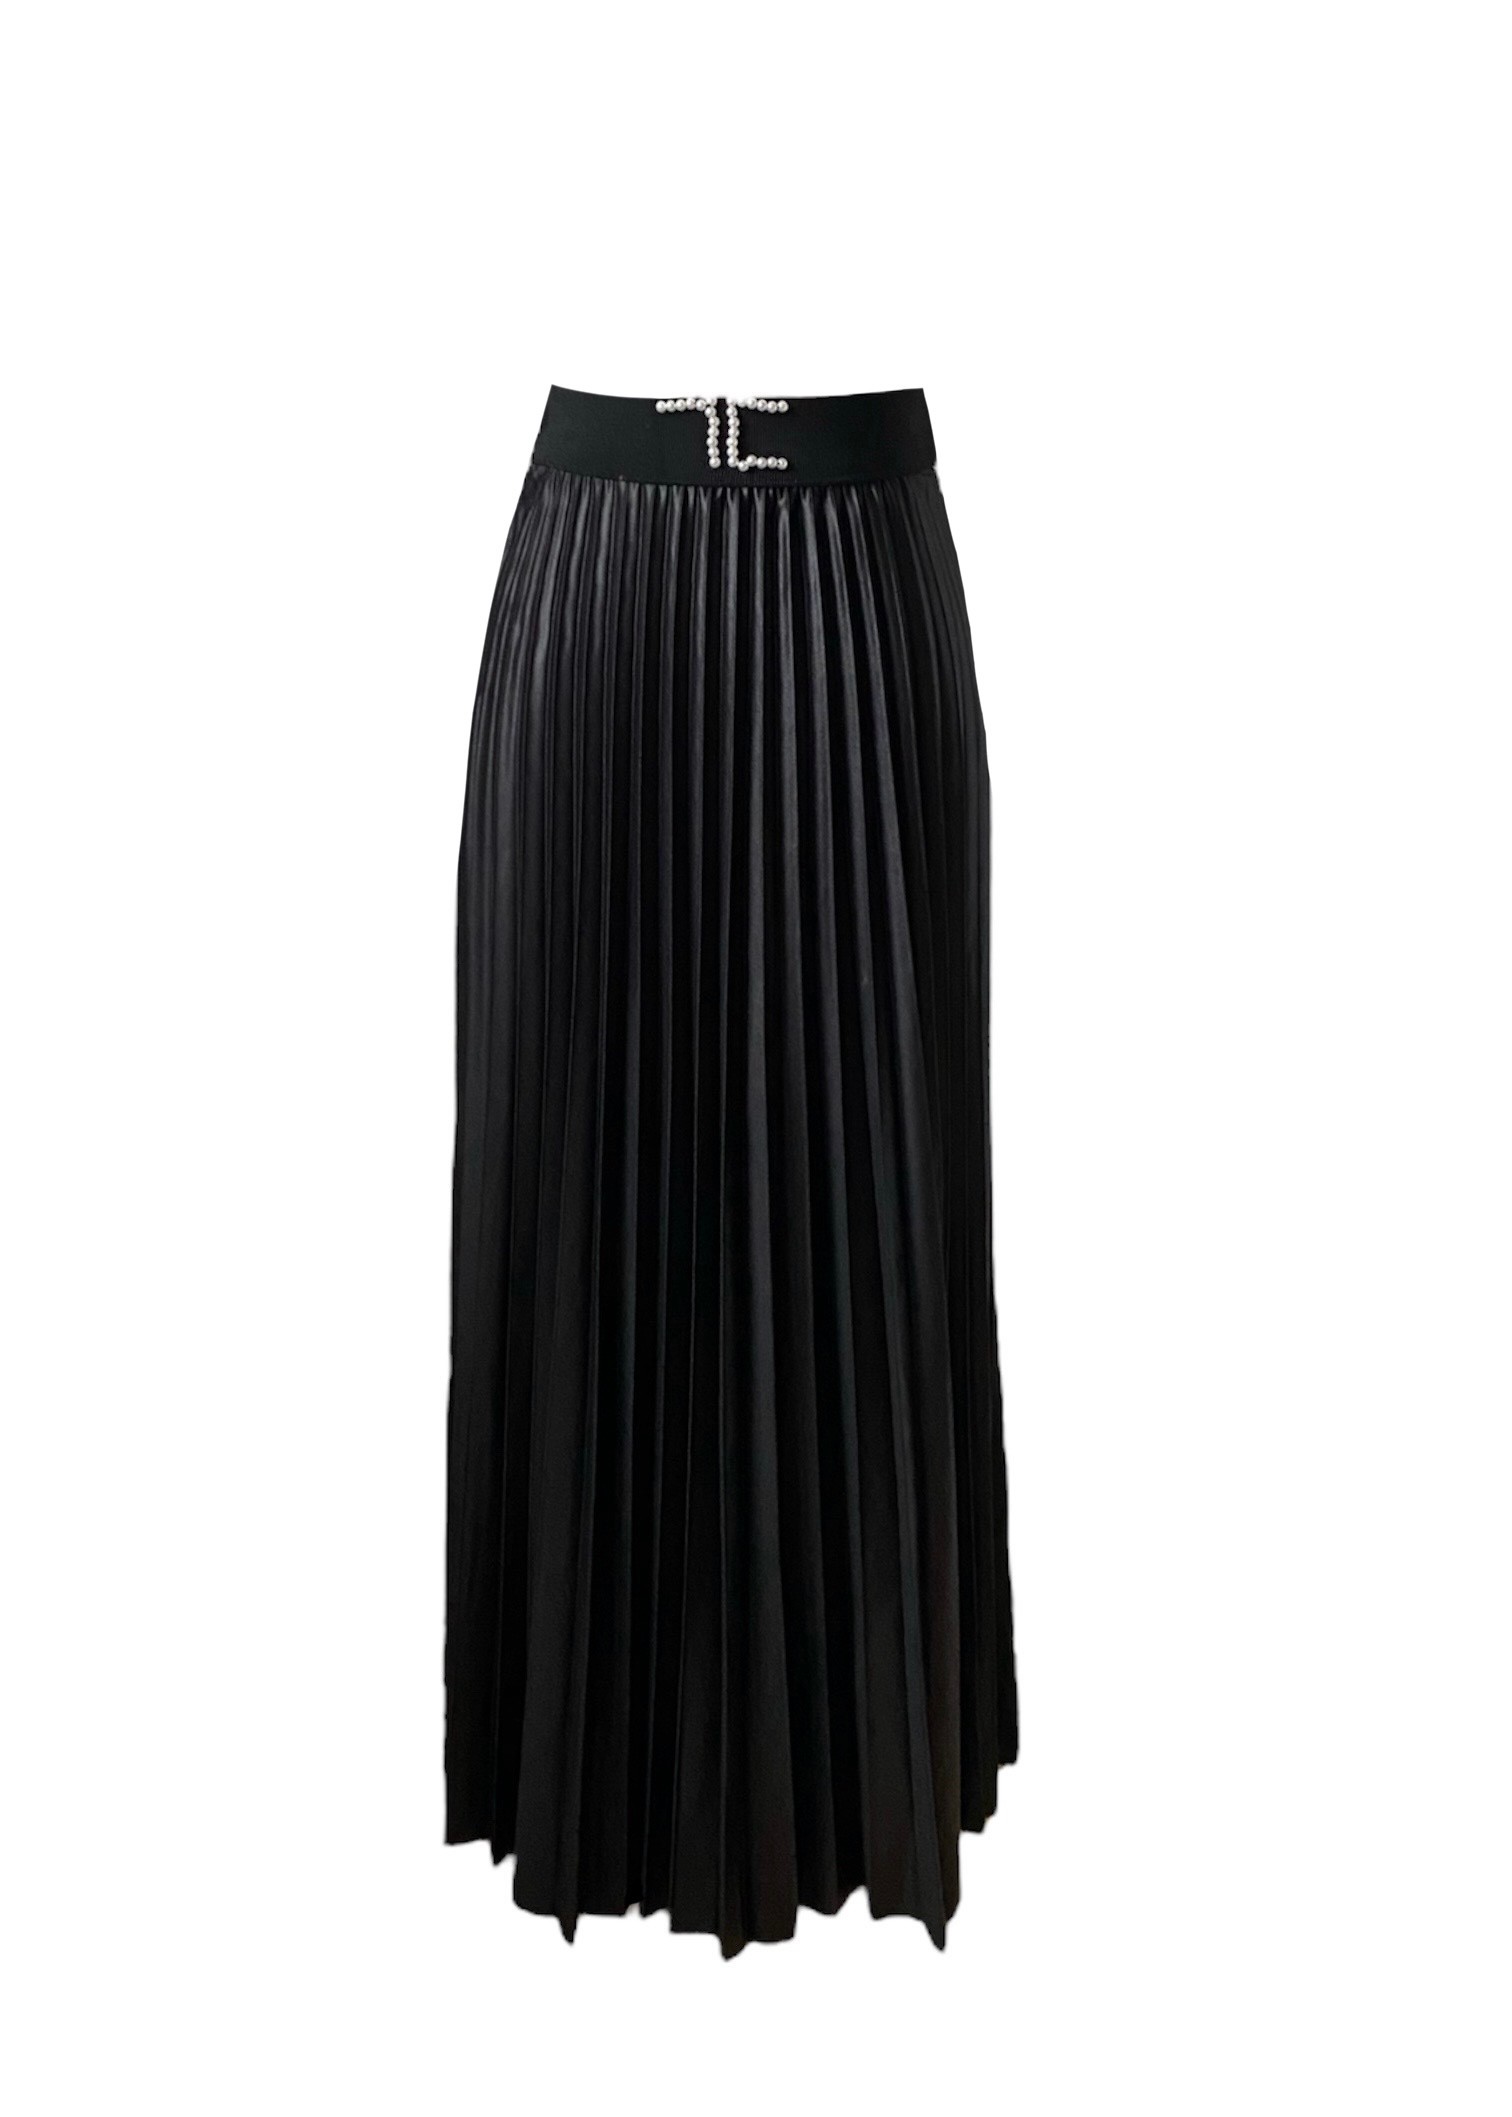 Black faux leather pleated skirt with the logo in pearls 